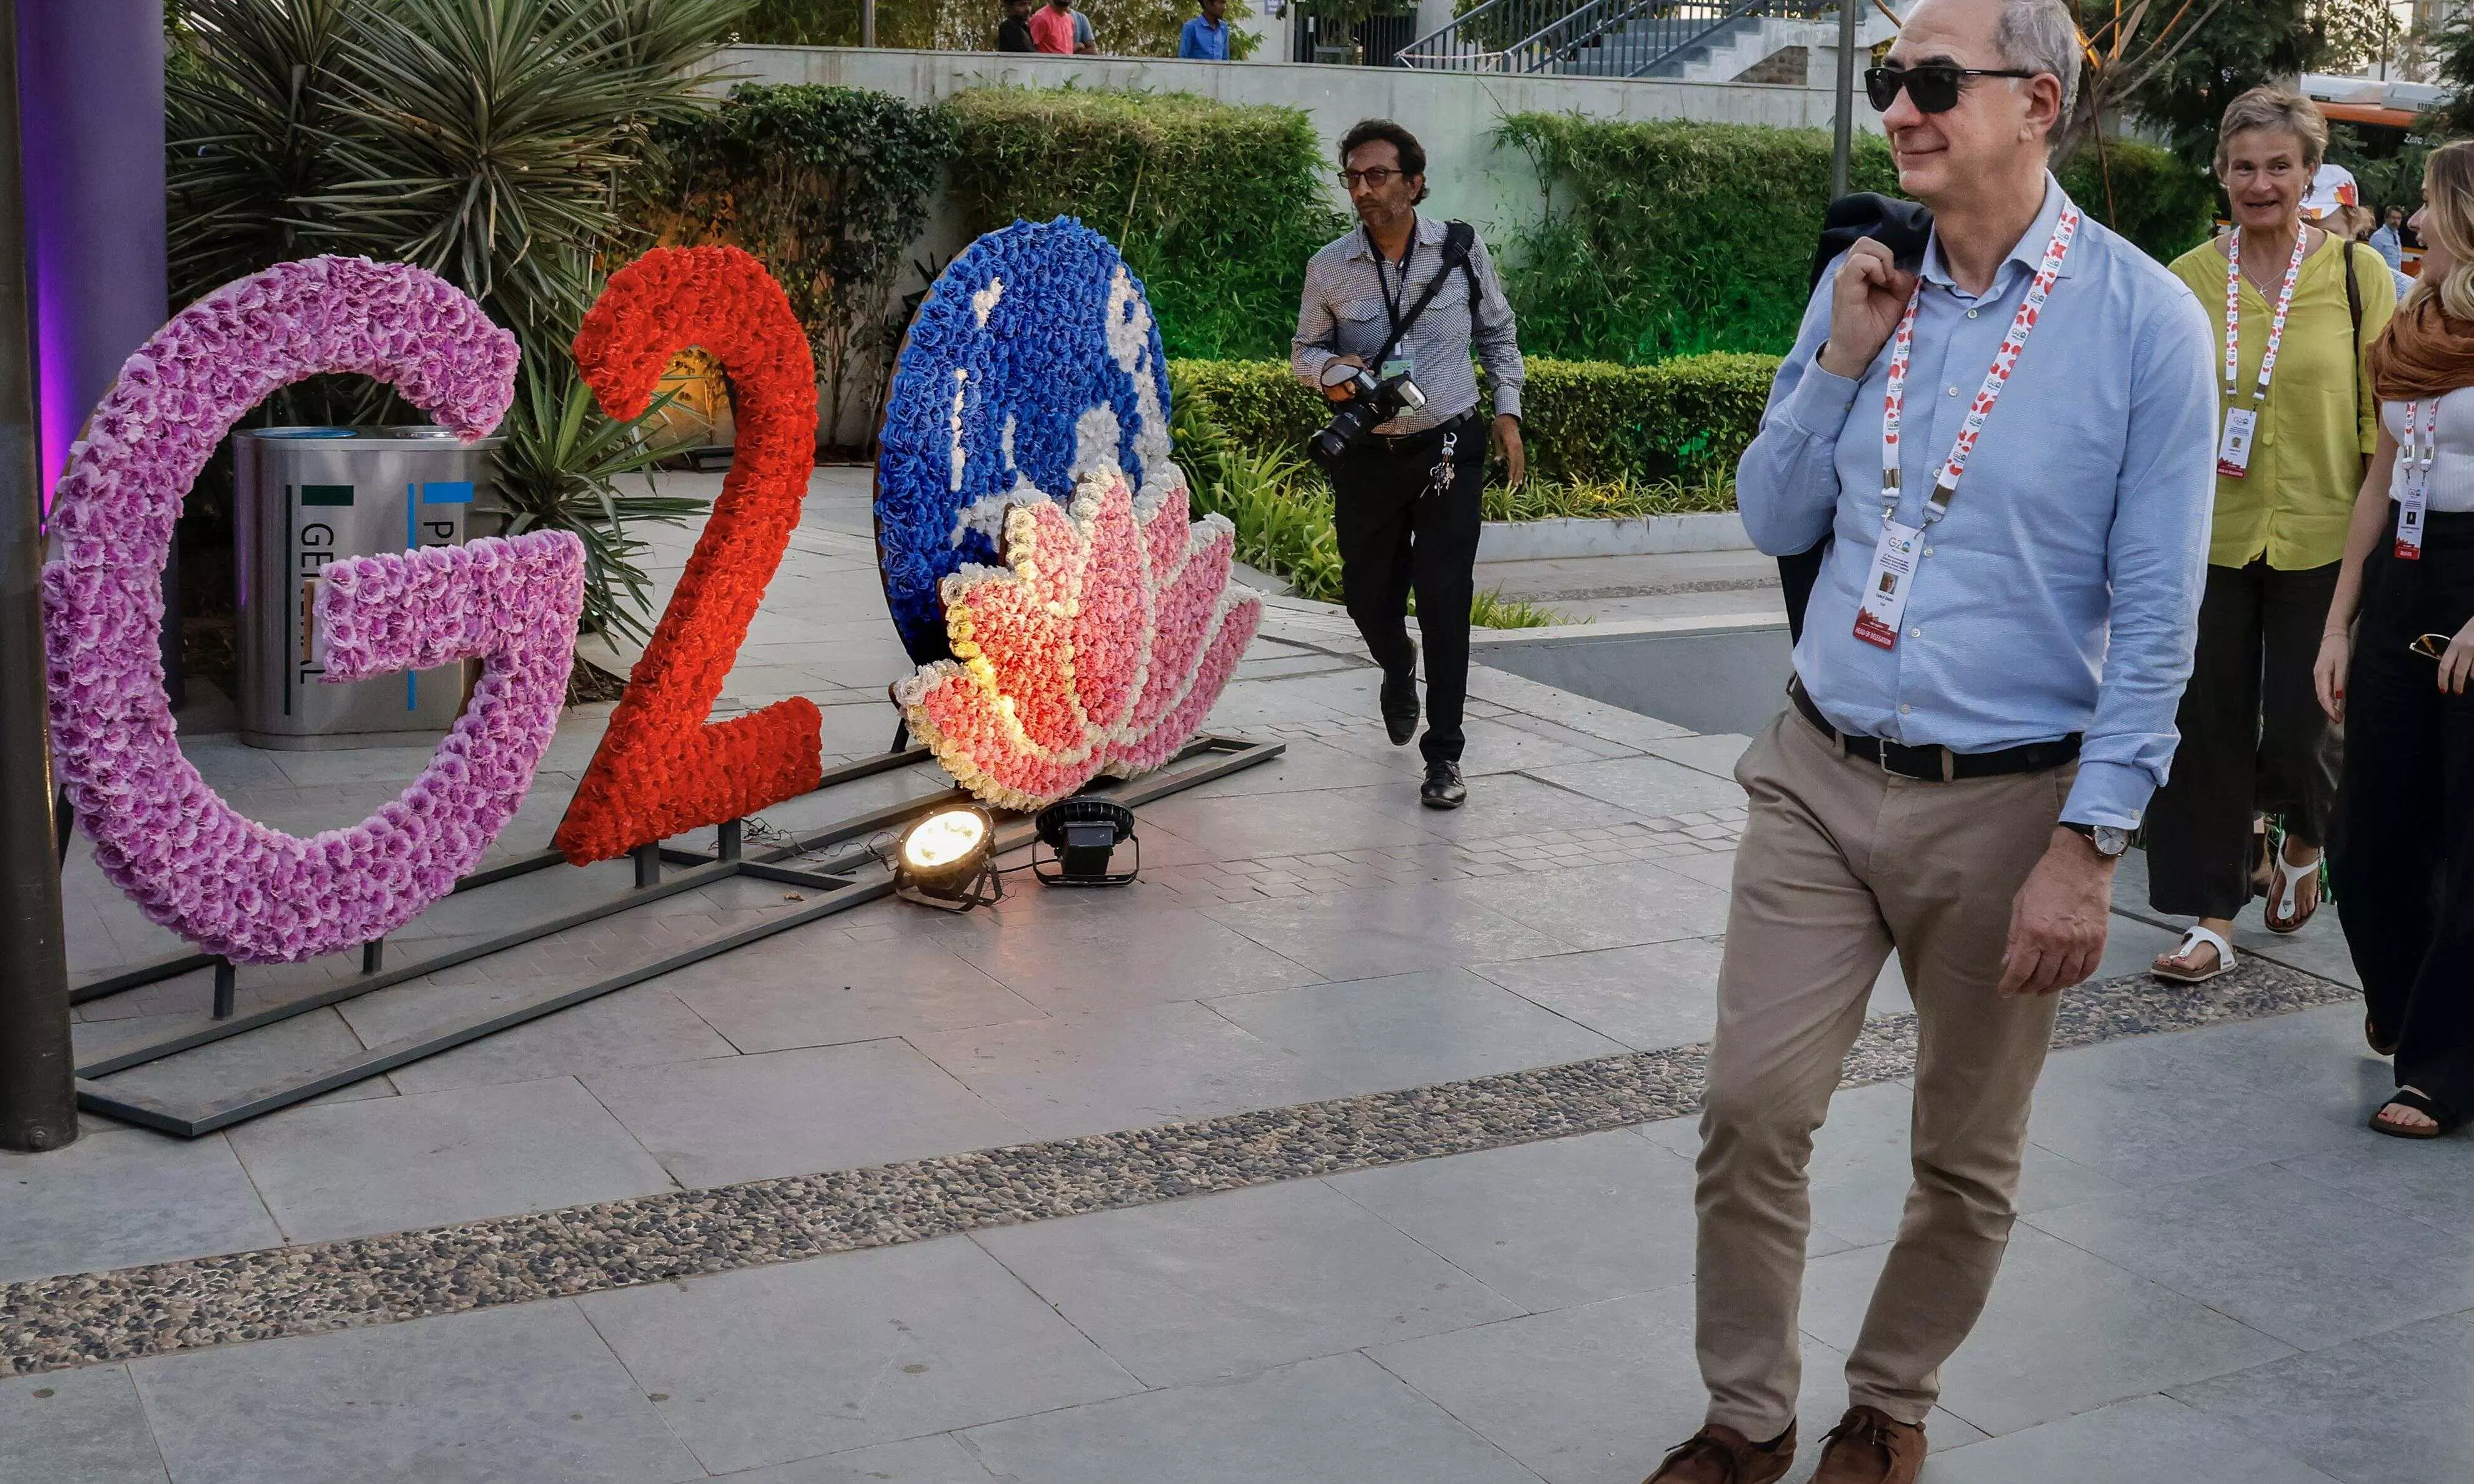 G20 Summit: Sculptures made of recycled materials to beautify Delhi parks, open spaces